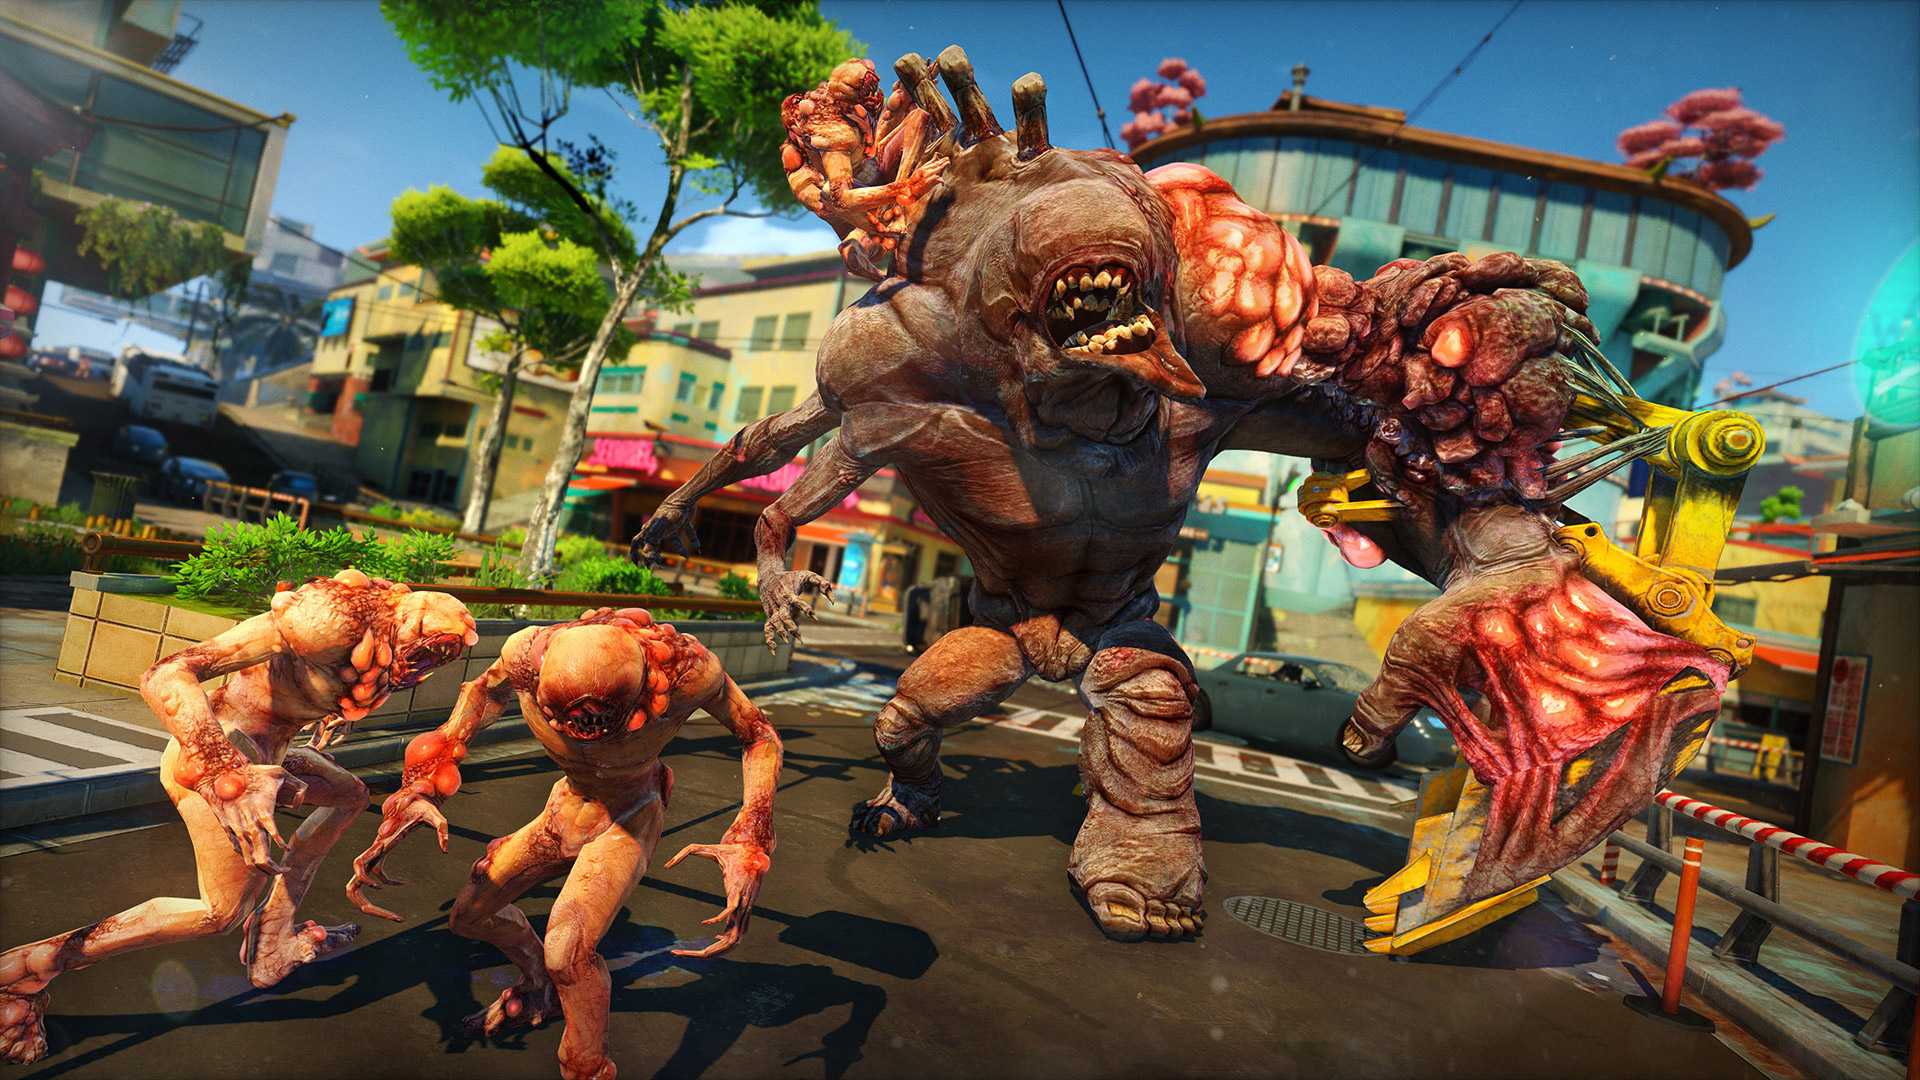 Scabs (Sunset Overdrive), Villains Wiki